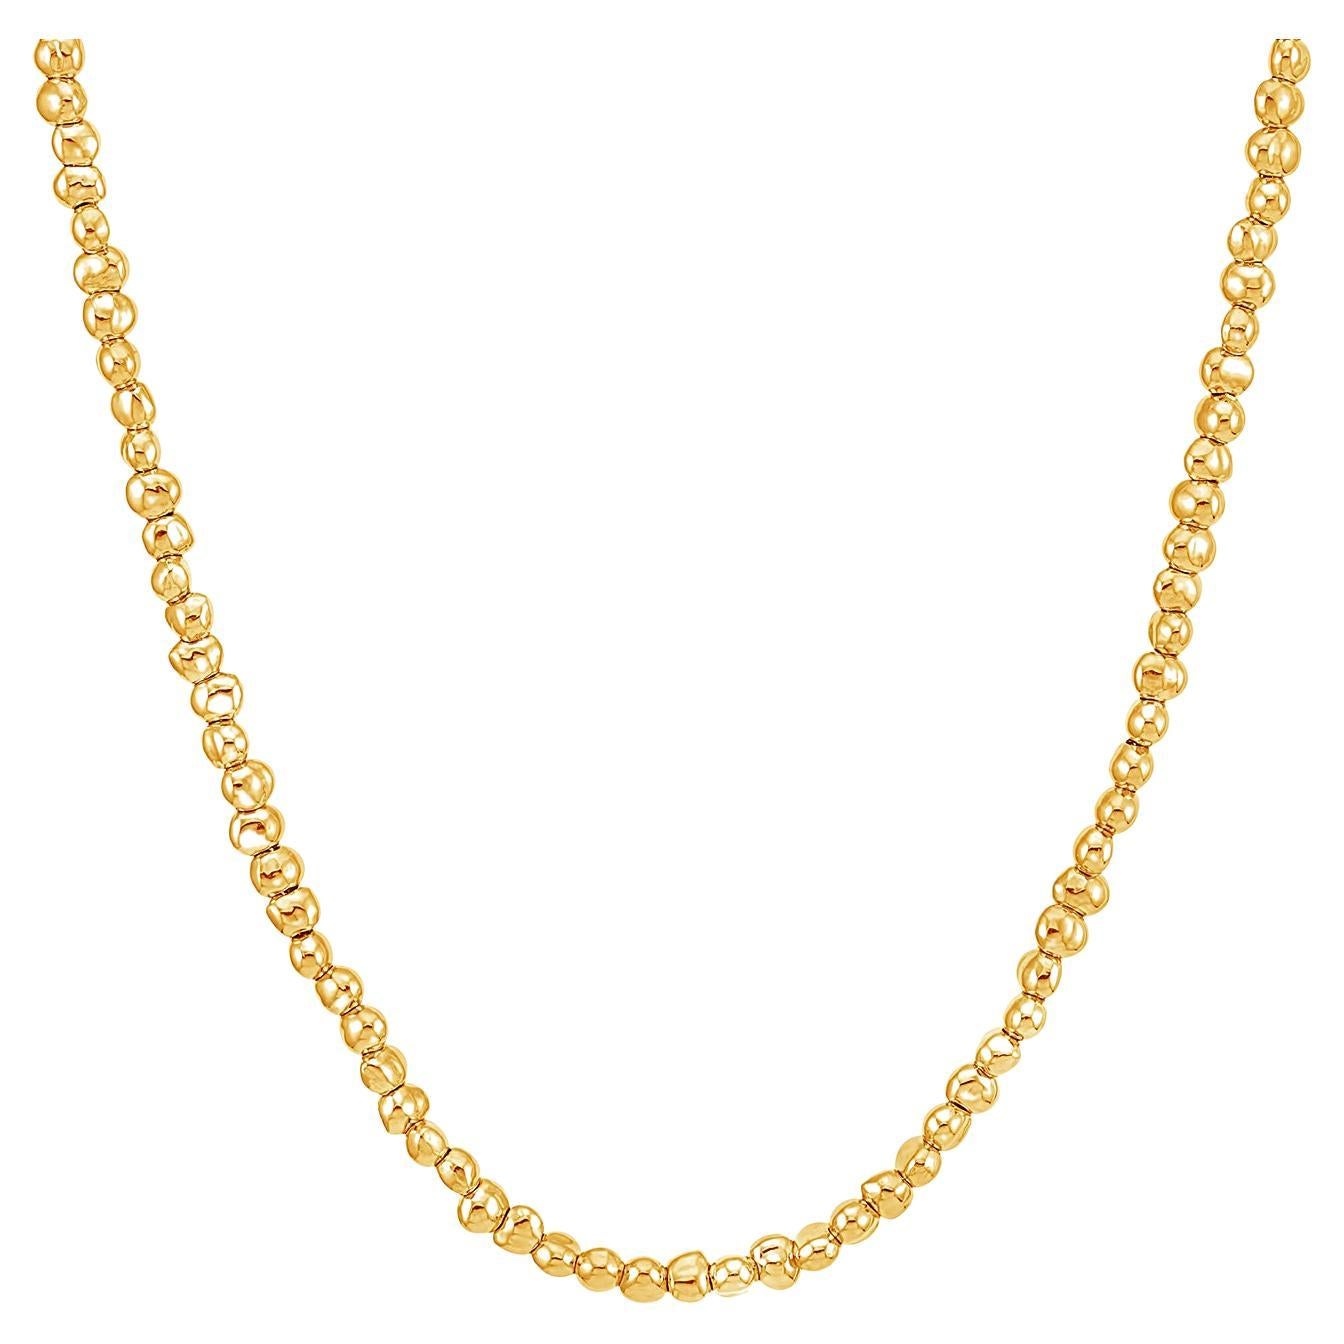 Dower & Hall Chunky Signature Nugget Necklace